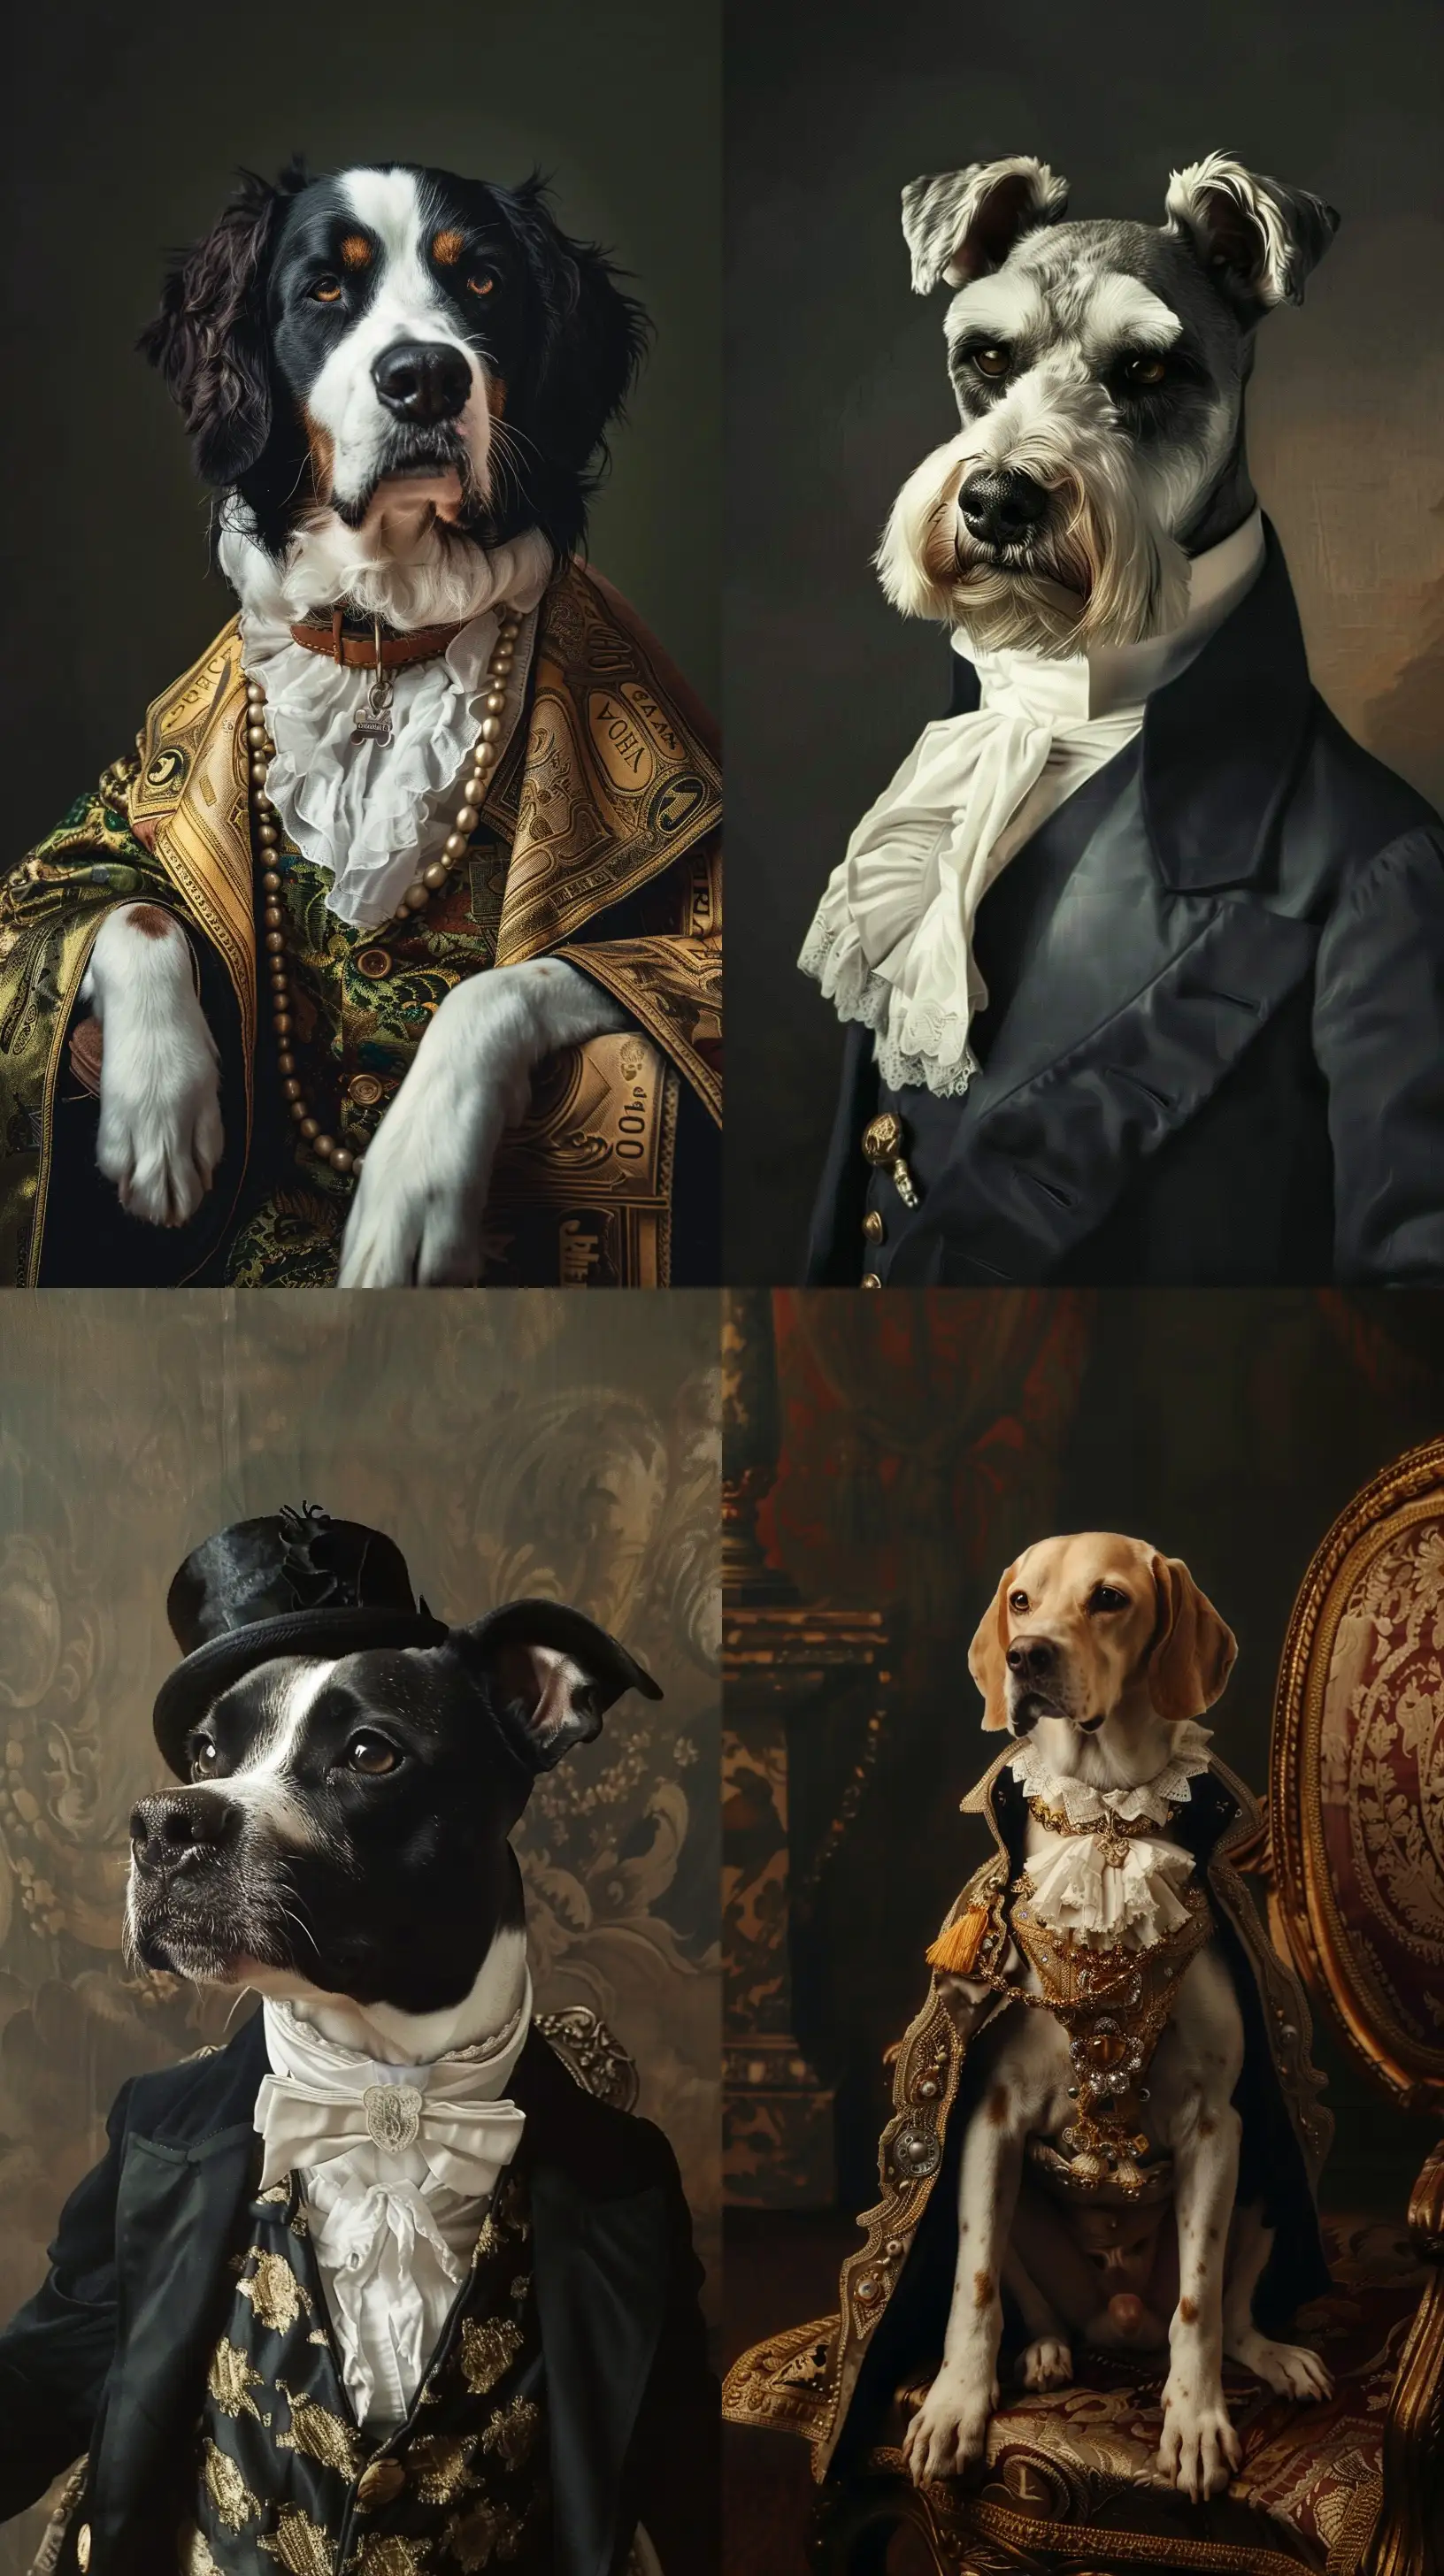 Elegant-Canine-Portraits-in-the-Style-of-Old-Money